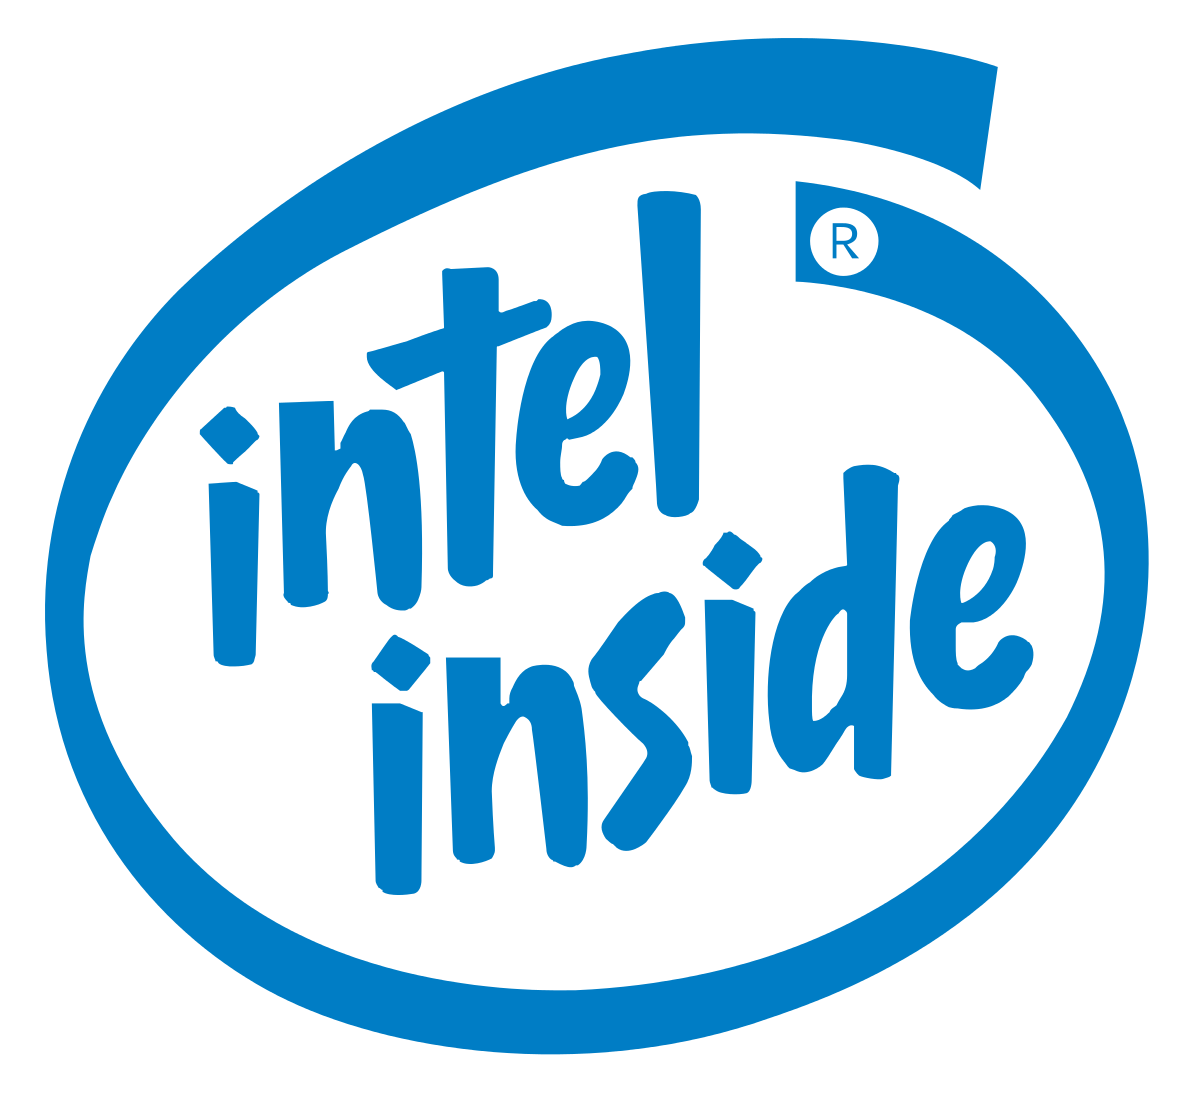 Red Intel Logo - Intel Logo, symbol, meaning, History and Evolution